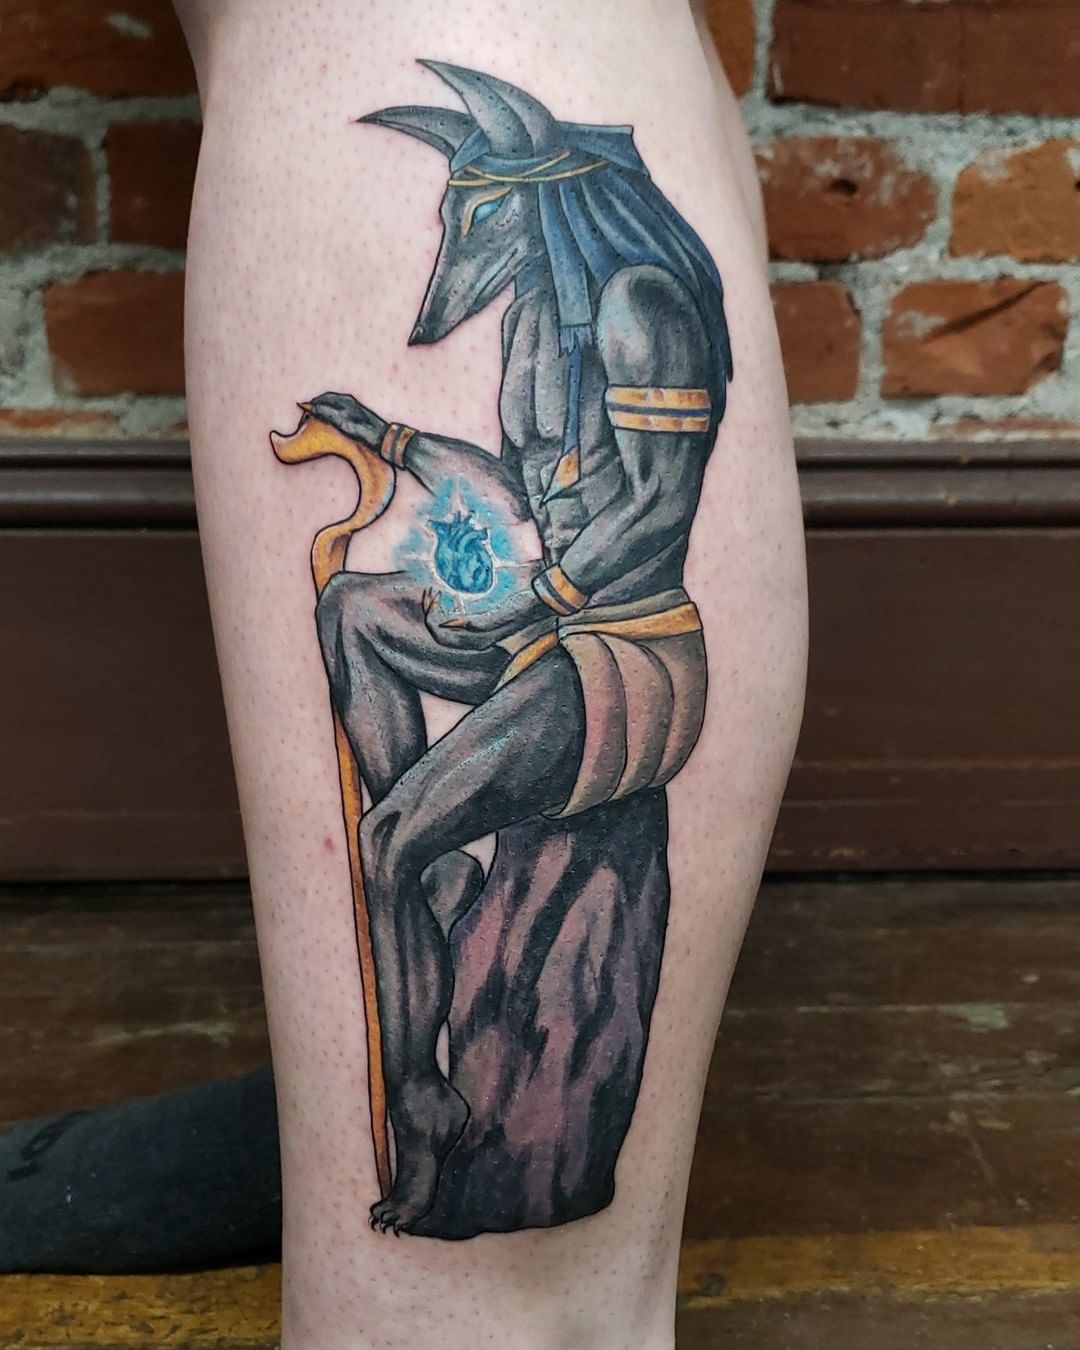 Your tattoo can show the true representation of Anubis.